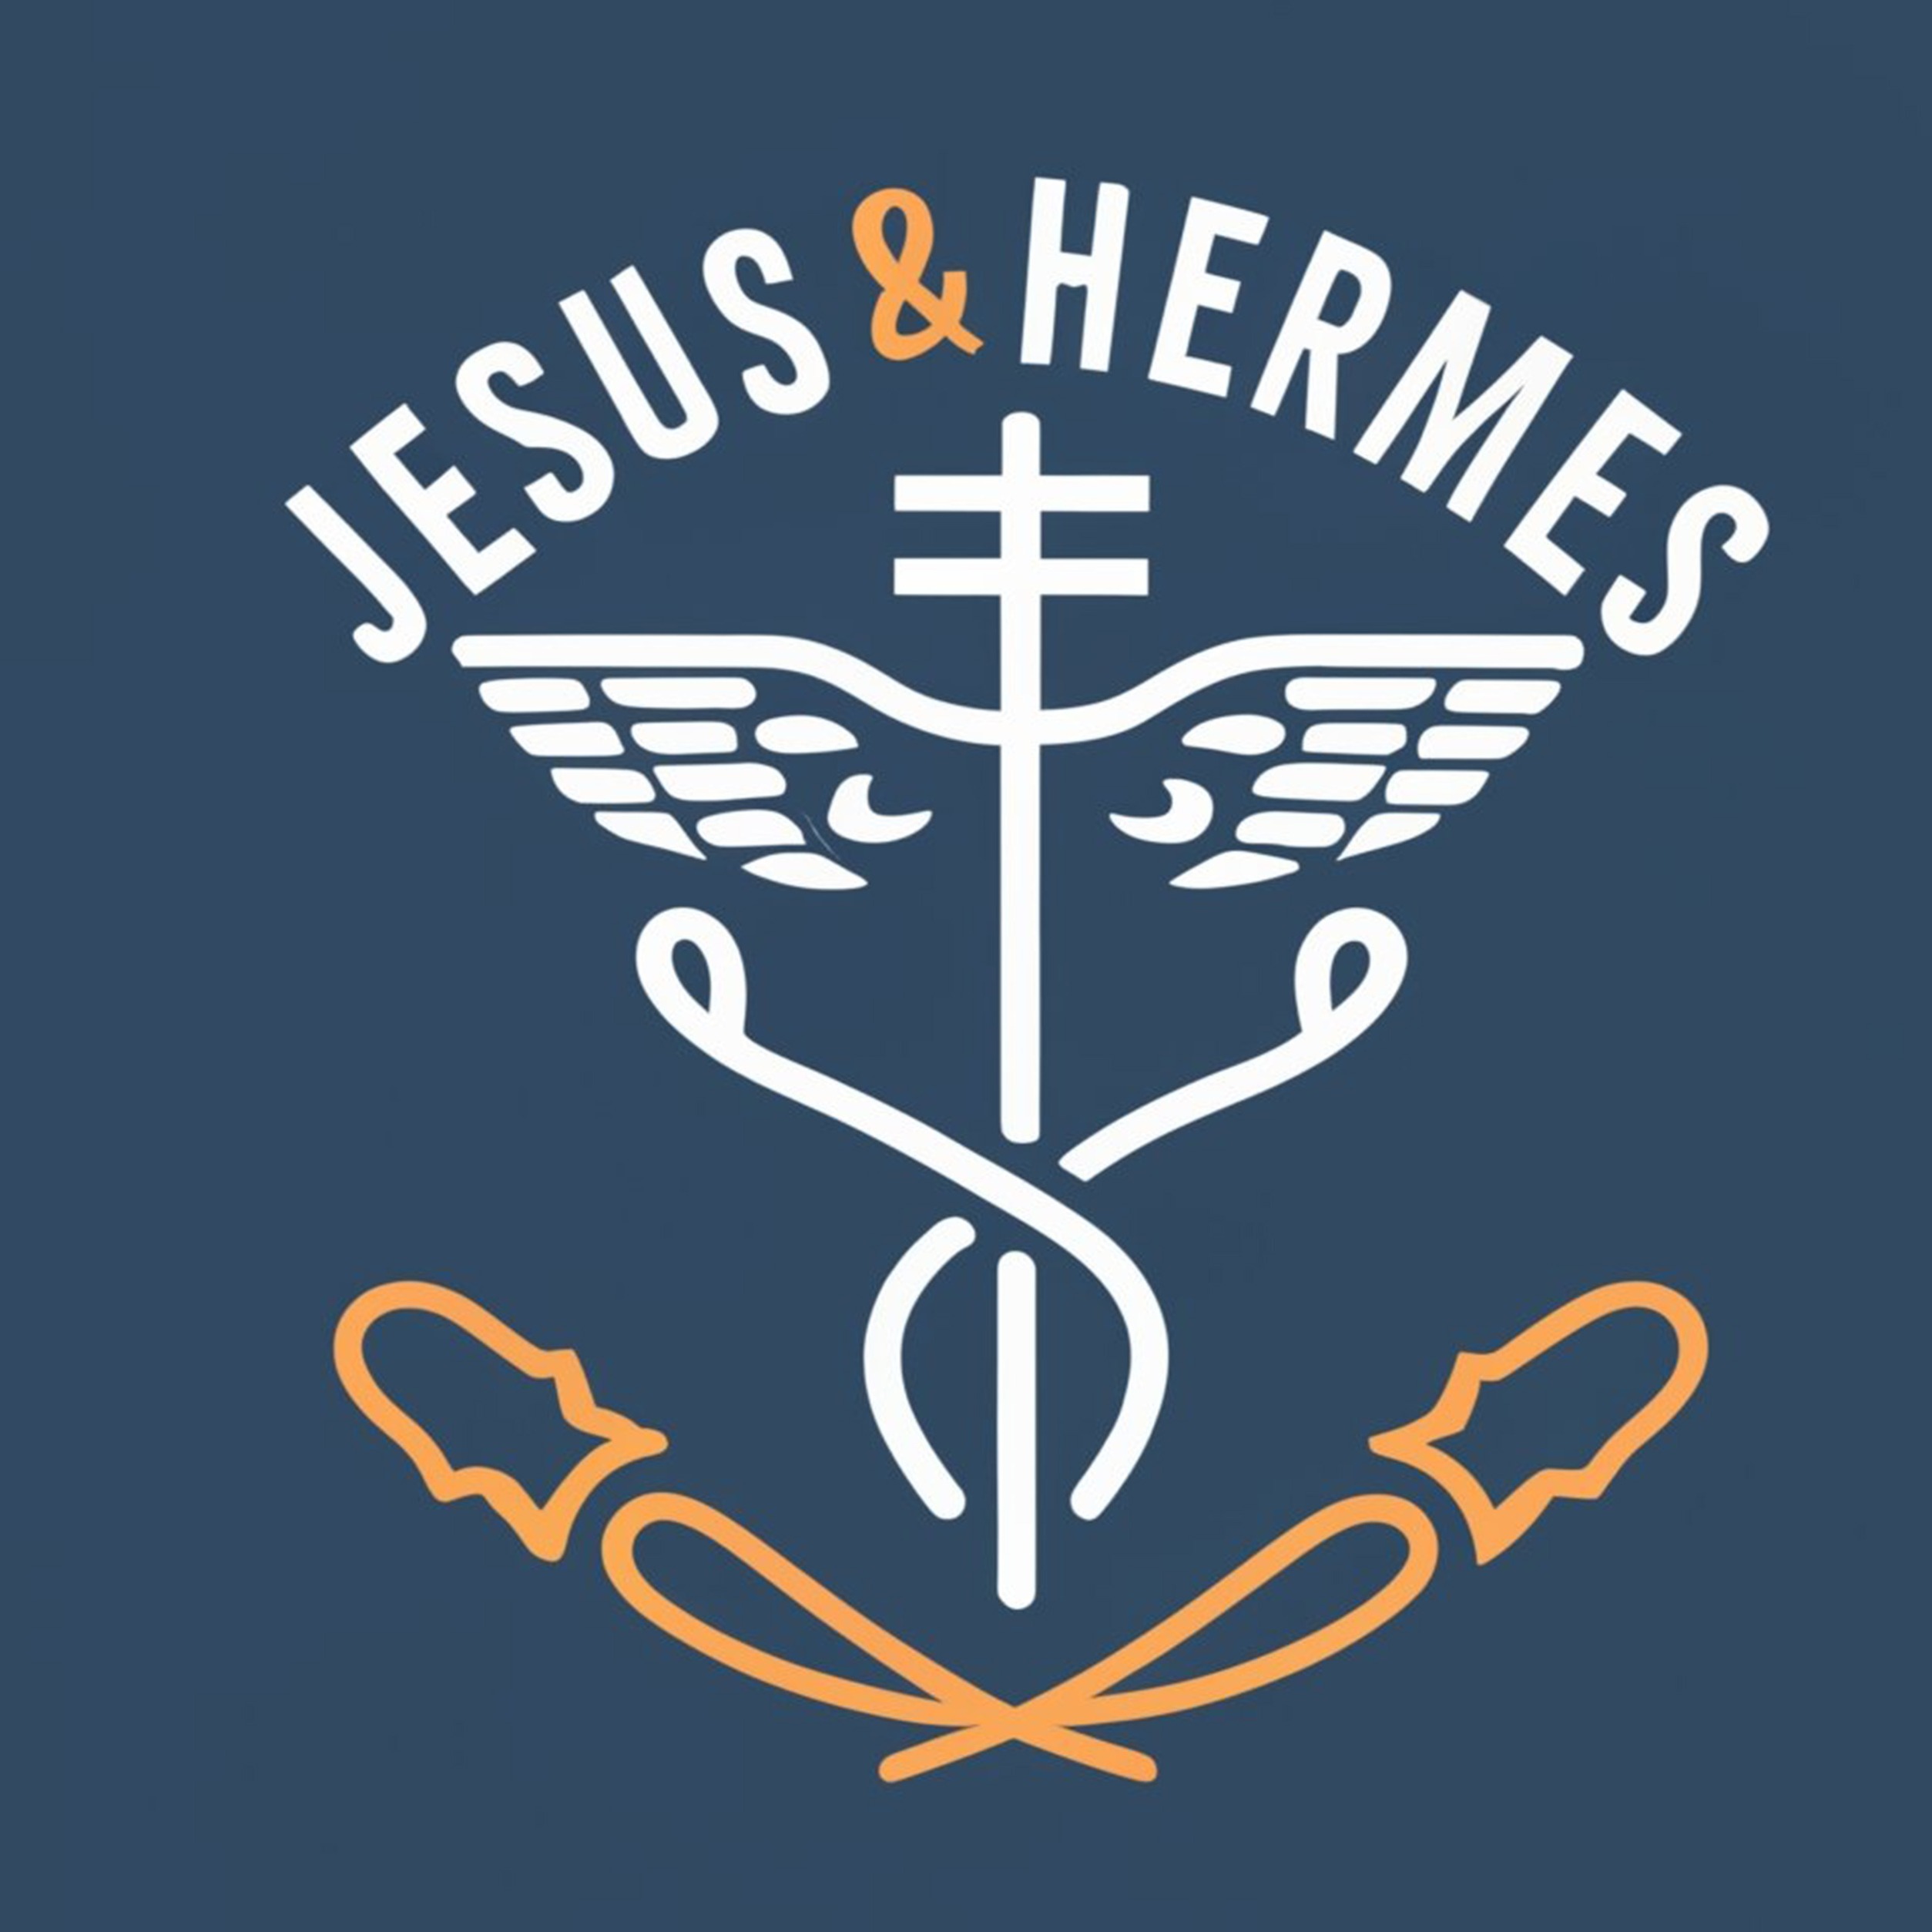 Simon from Library of Gnosis on Jesus and Hermes